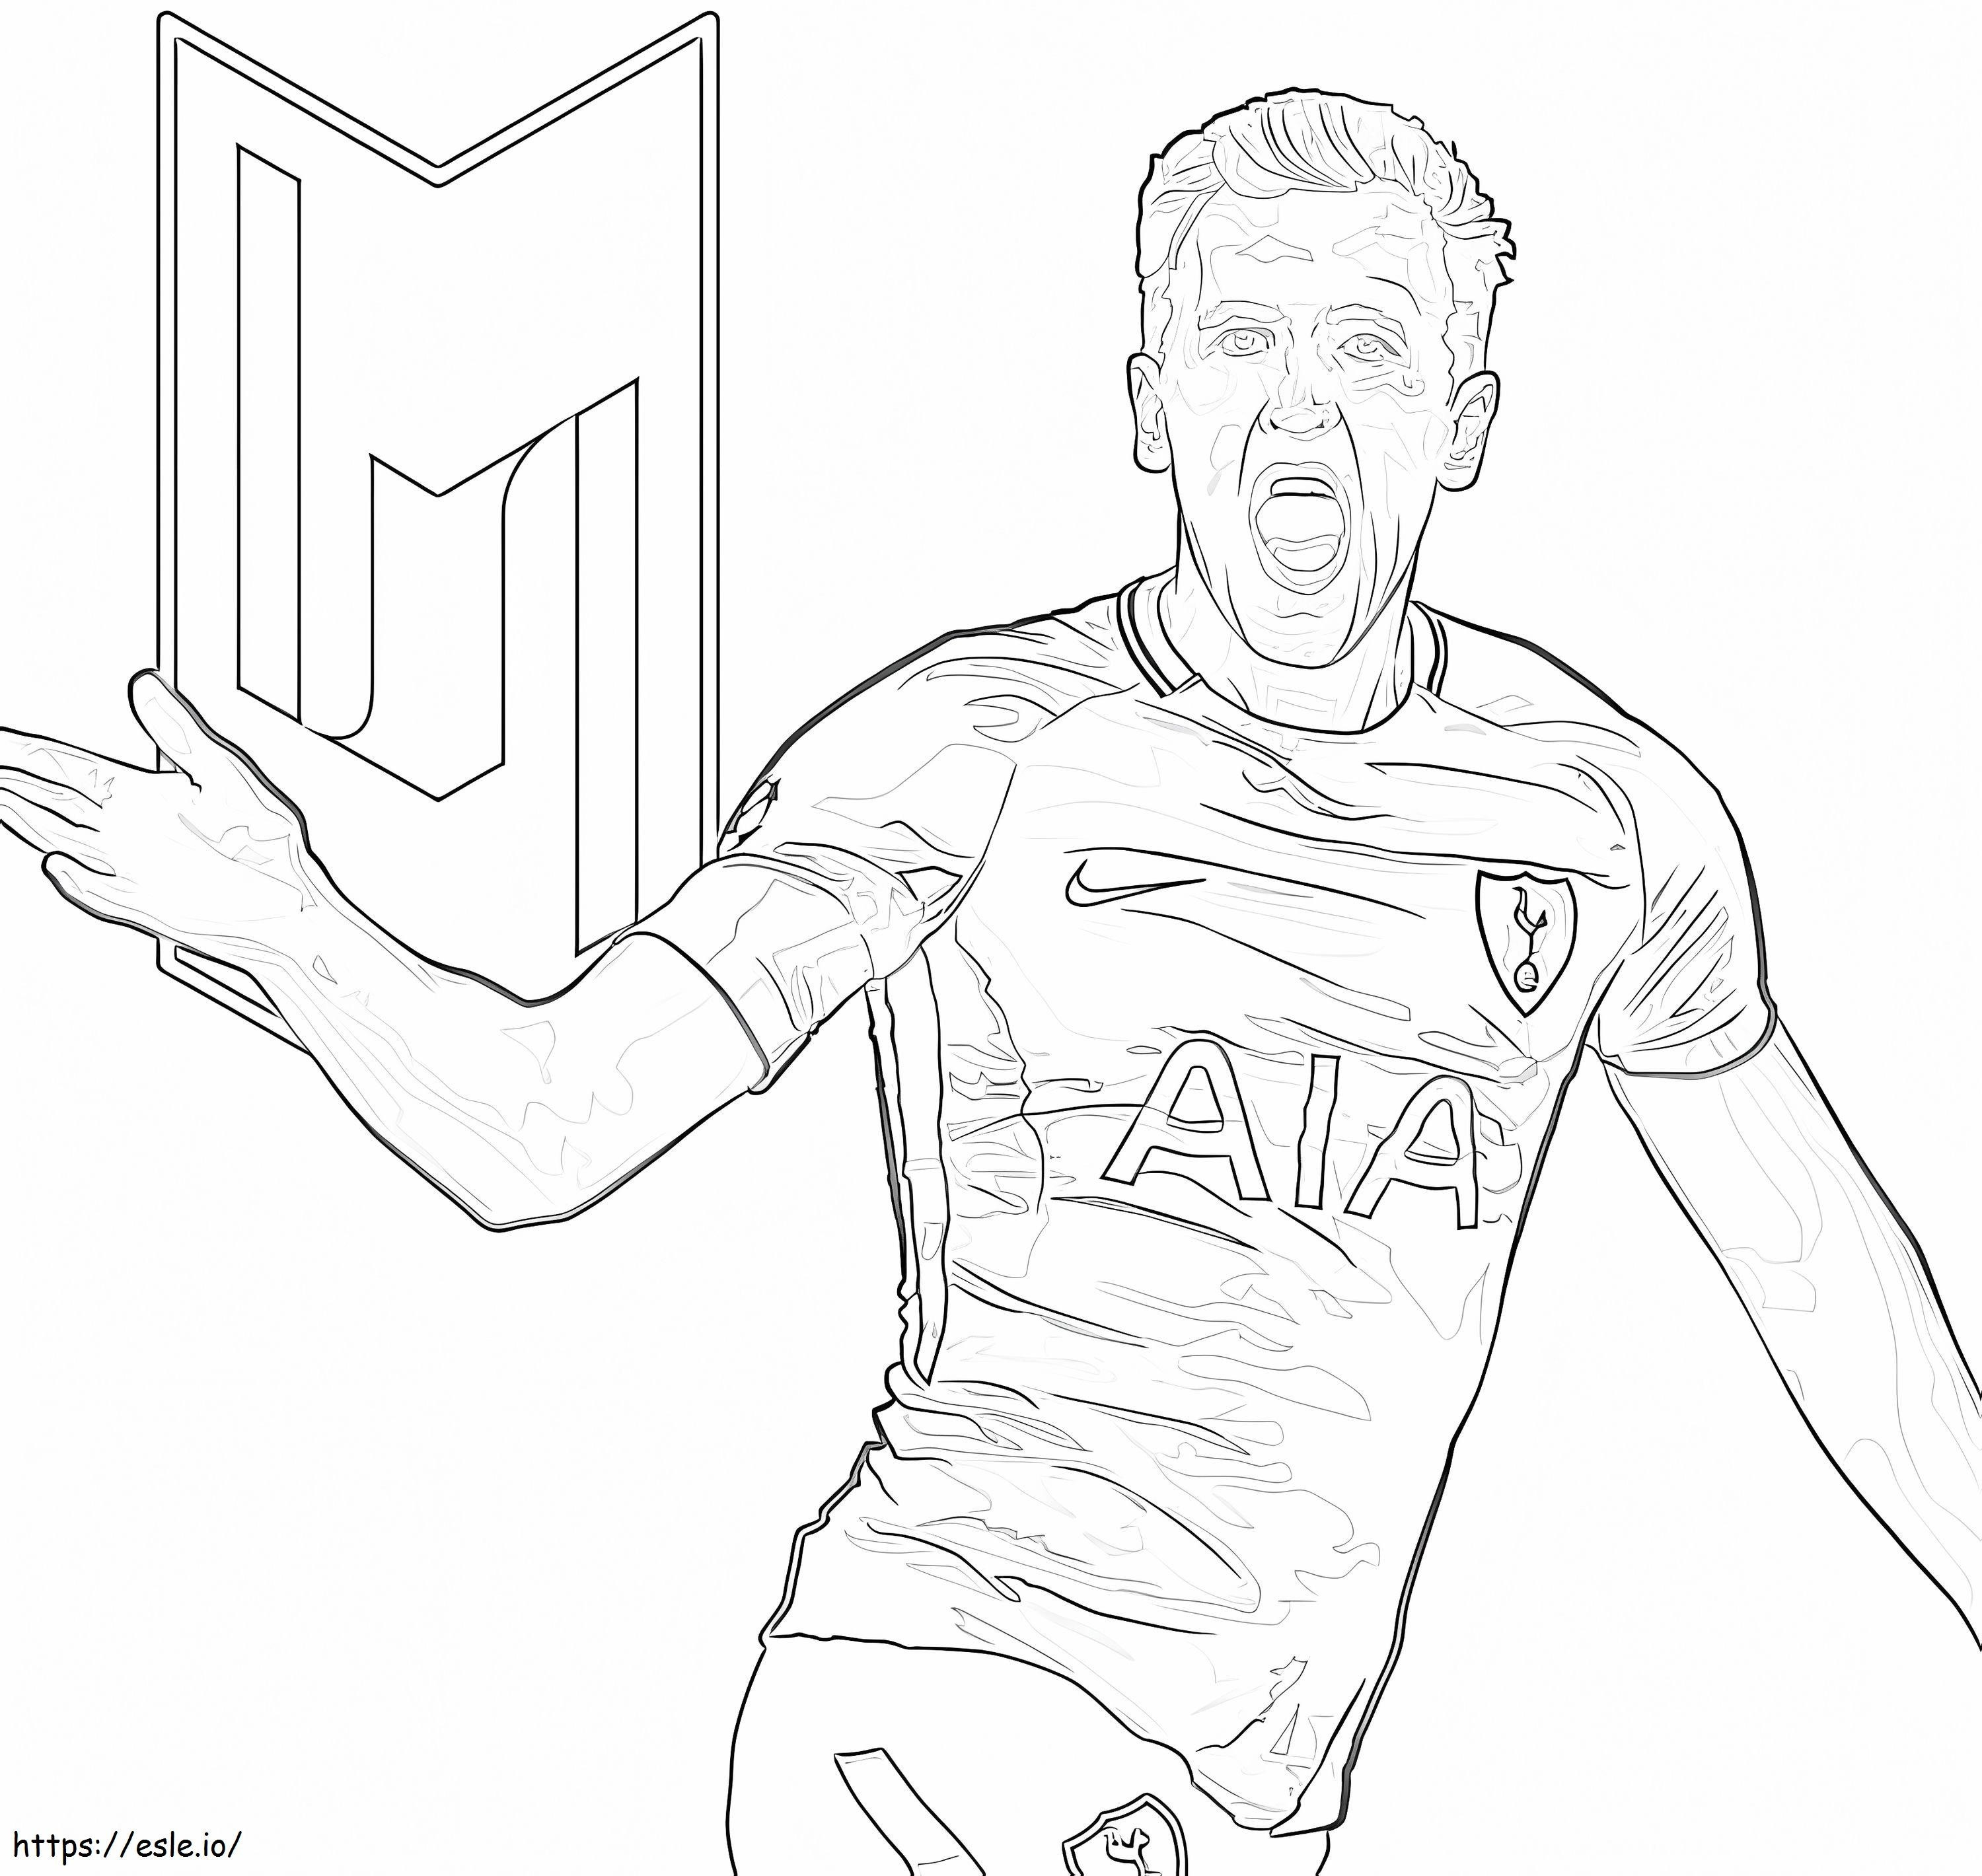 Harry Kane 9 coloring page